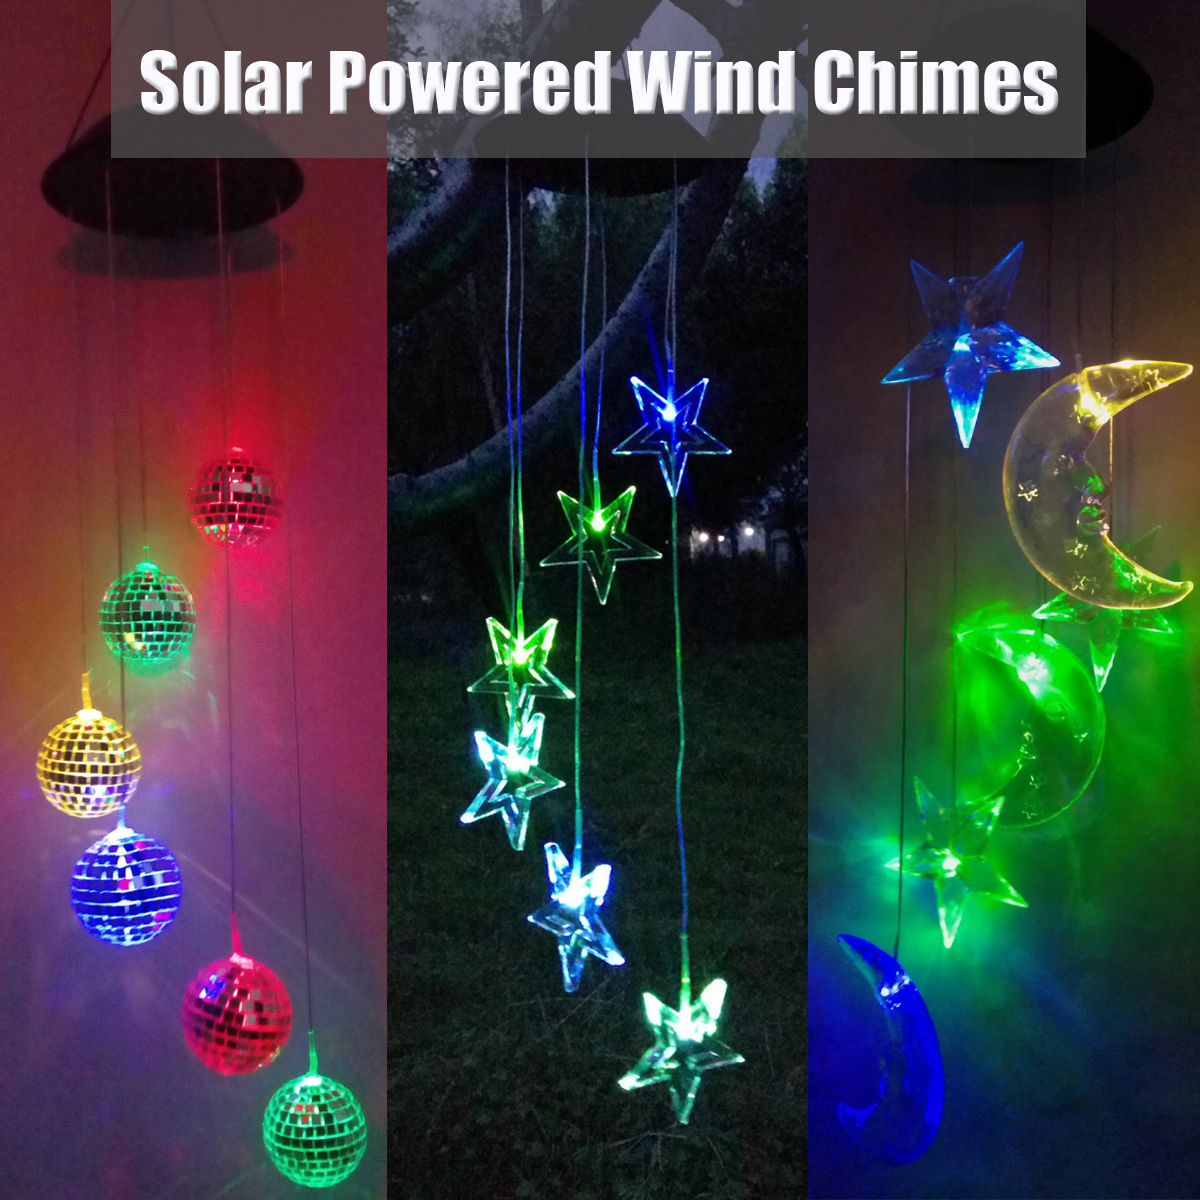 Solar-Powered-Wind-Chimes-Light-Lamp-Hanging-LED-Garden-Yard-Color-Changing-1349404-1